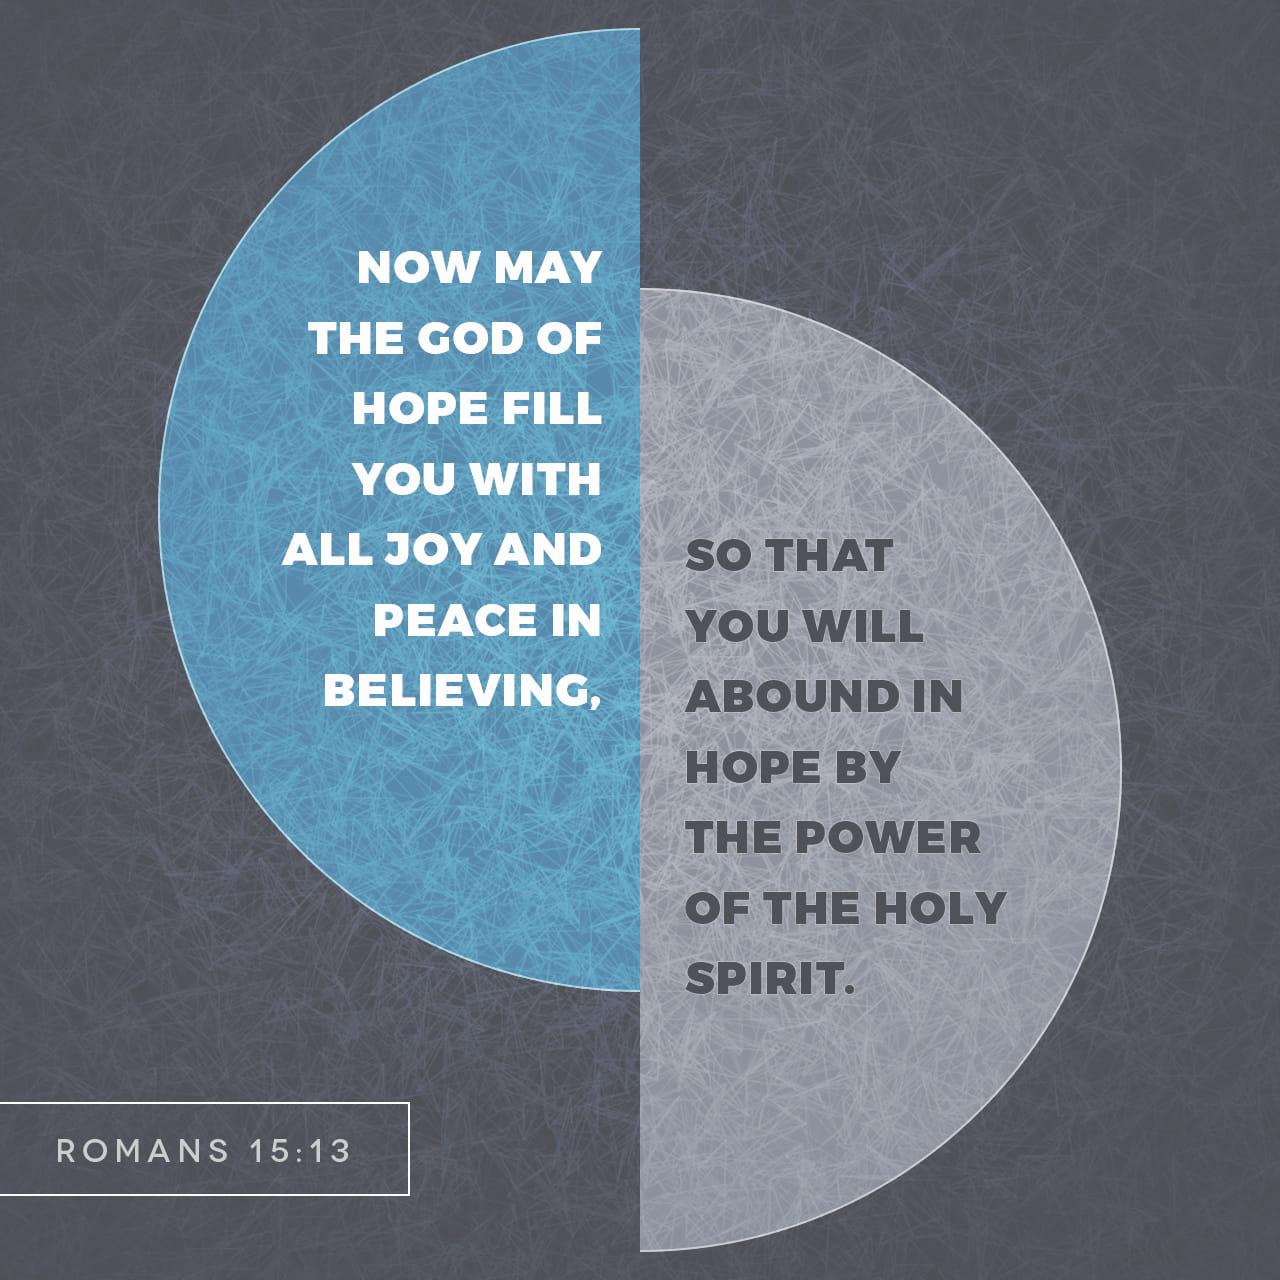 Bible Verse of the Day - day 81 - image 304 (Romans 15:13)